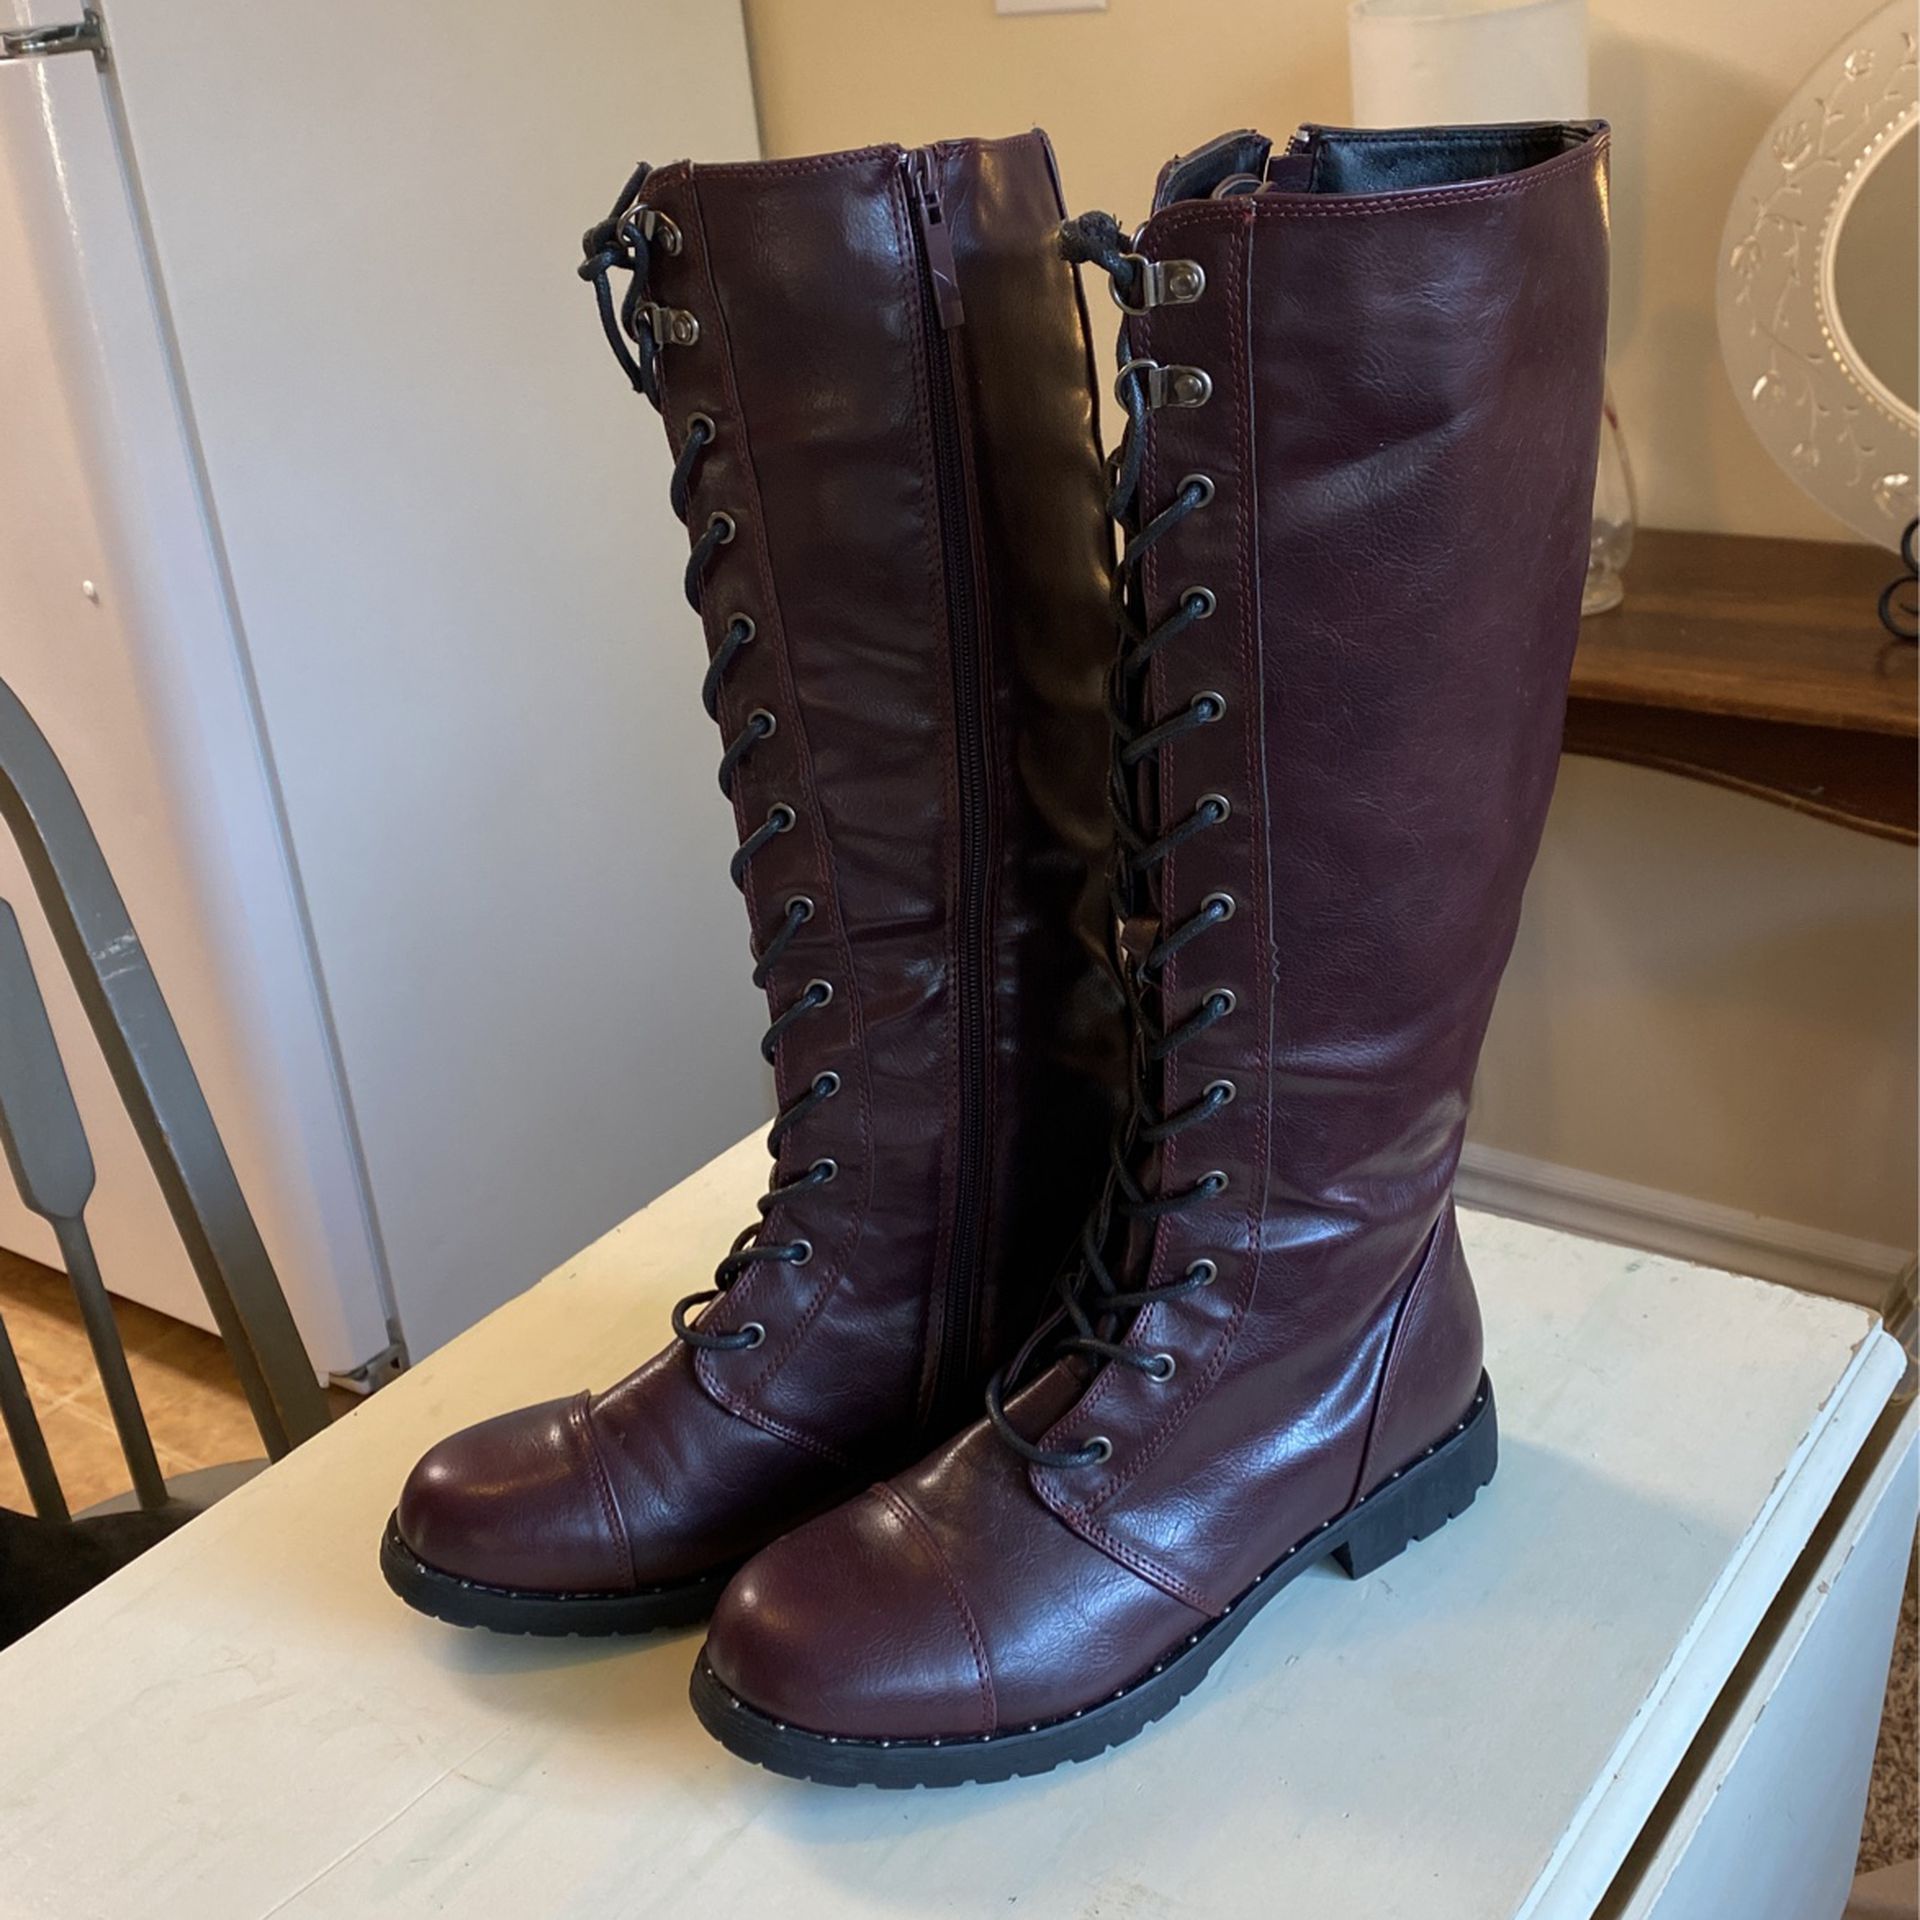 Burgundy Knee-High Boots With Zips On The Side